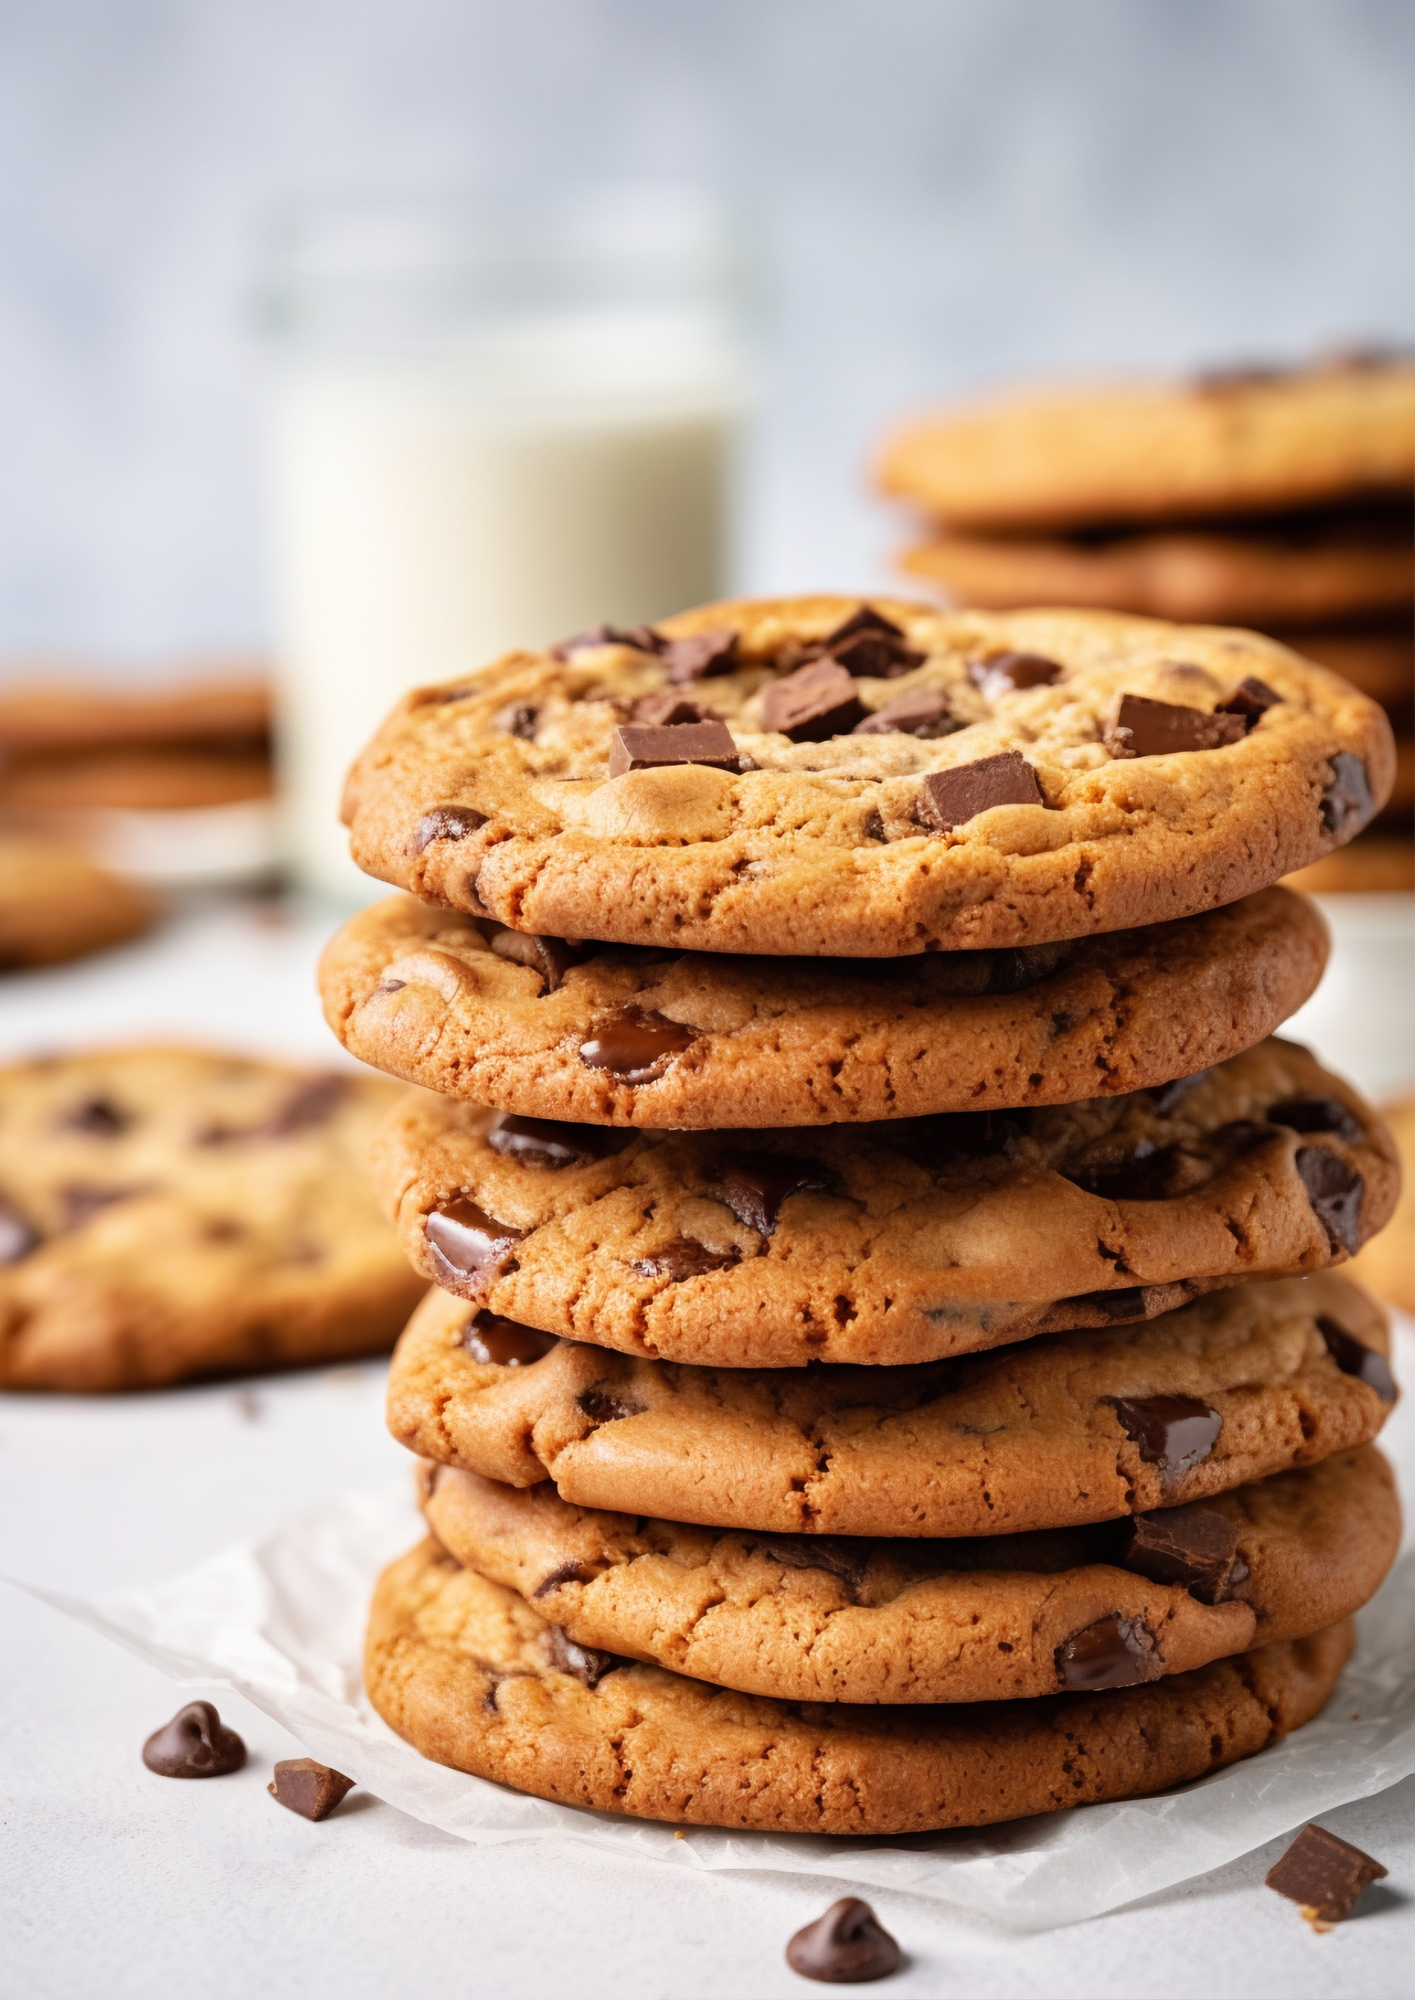 A stack of freshly baked Toll House cookies with chunks of chocolate nestled in a golden-brown dough, accompanied by a glass of milk in the background, evoking a warm, homemade treat.